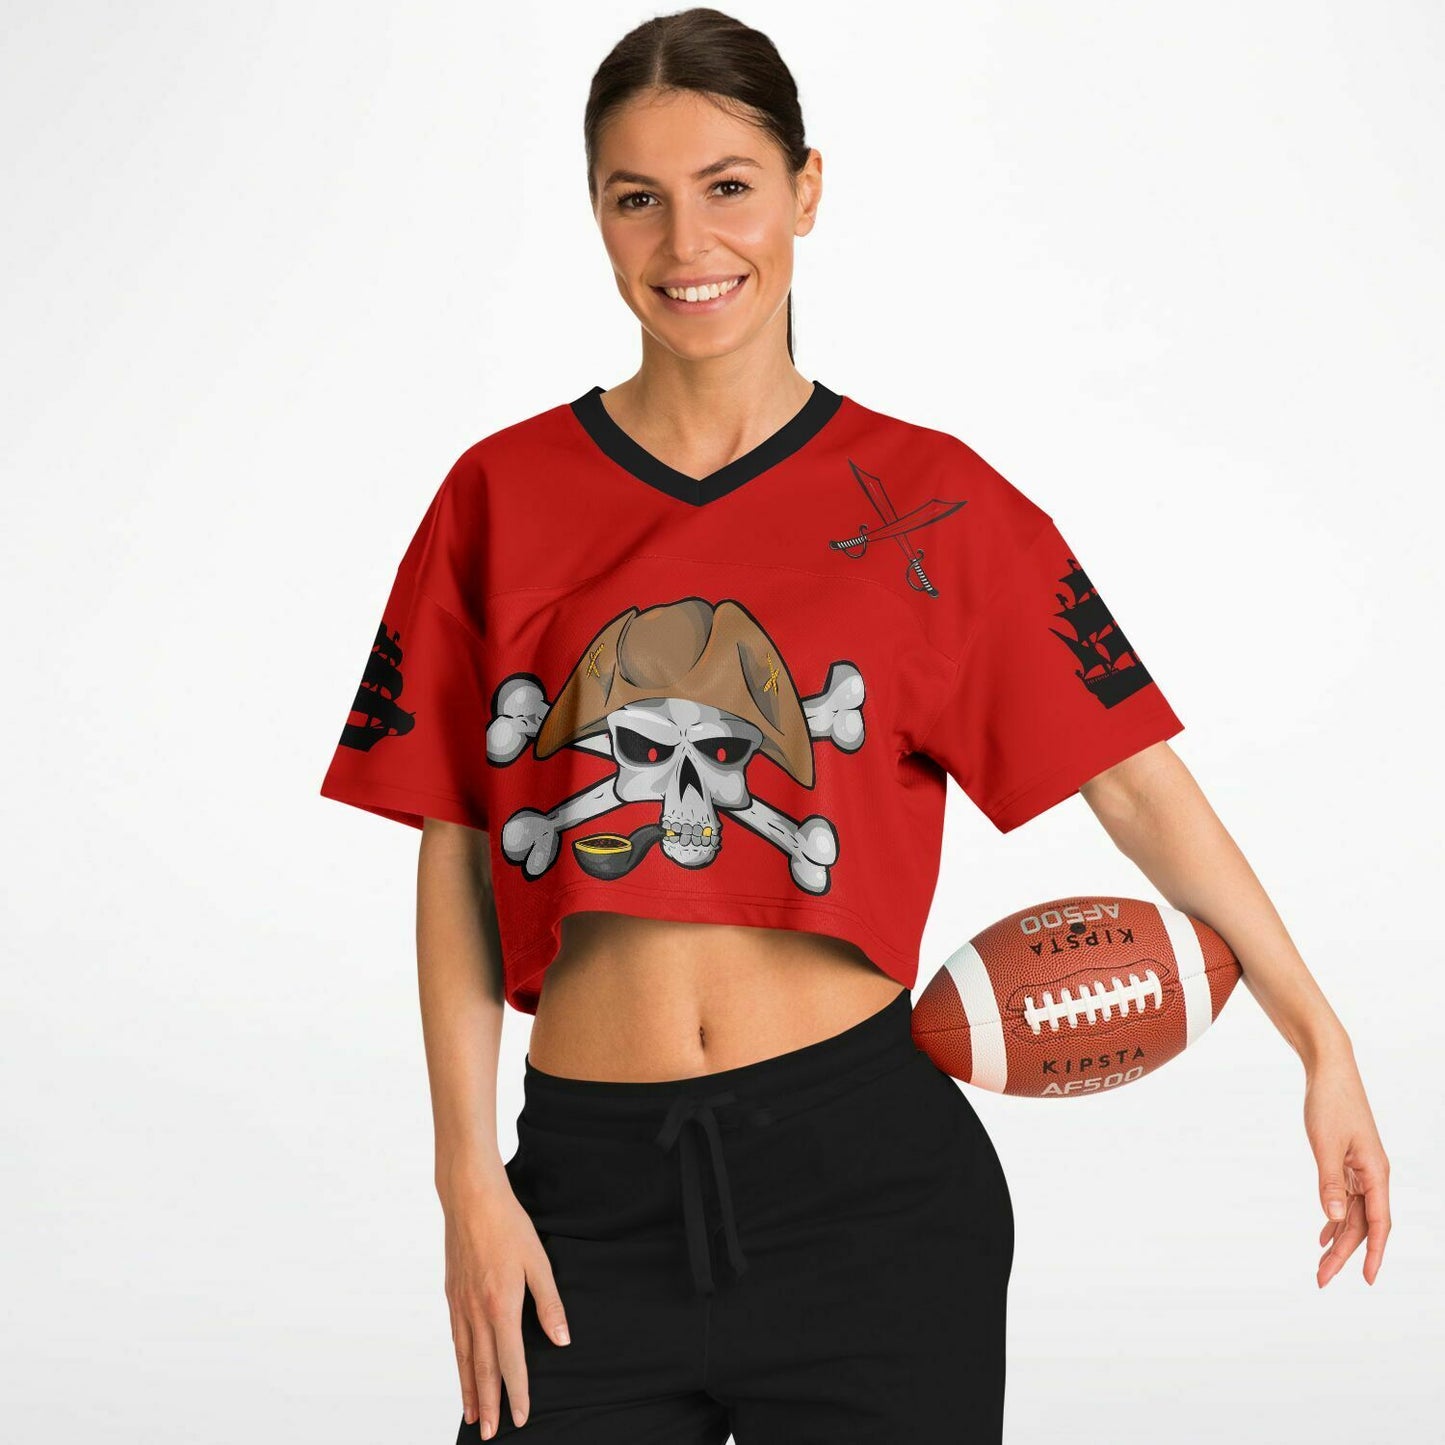 Gasparilla Cropped Woman's Football Jersey